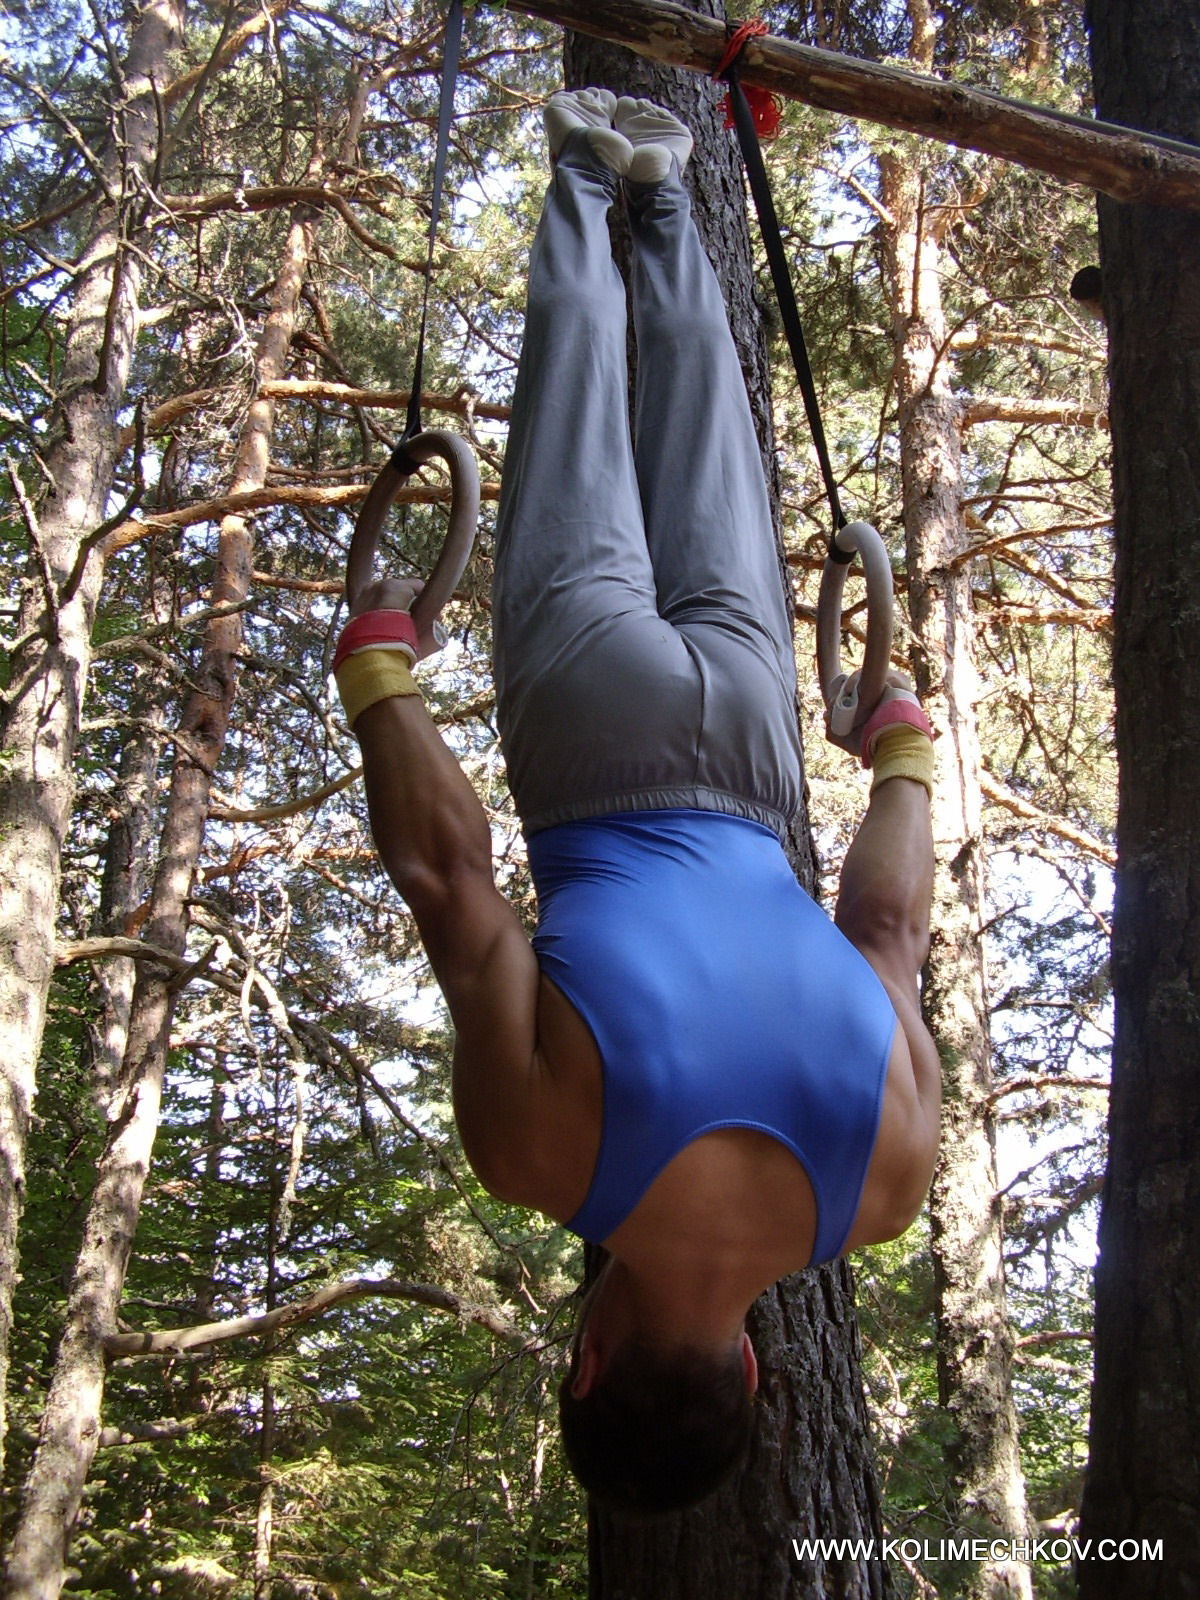 Inverted hang on Rings